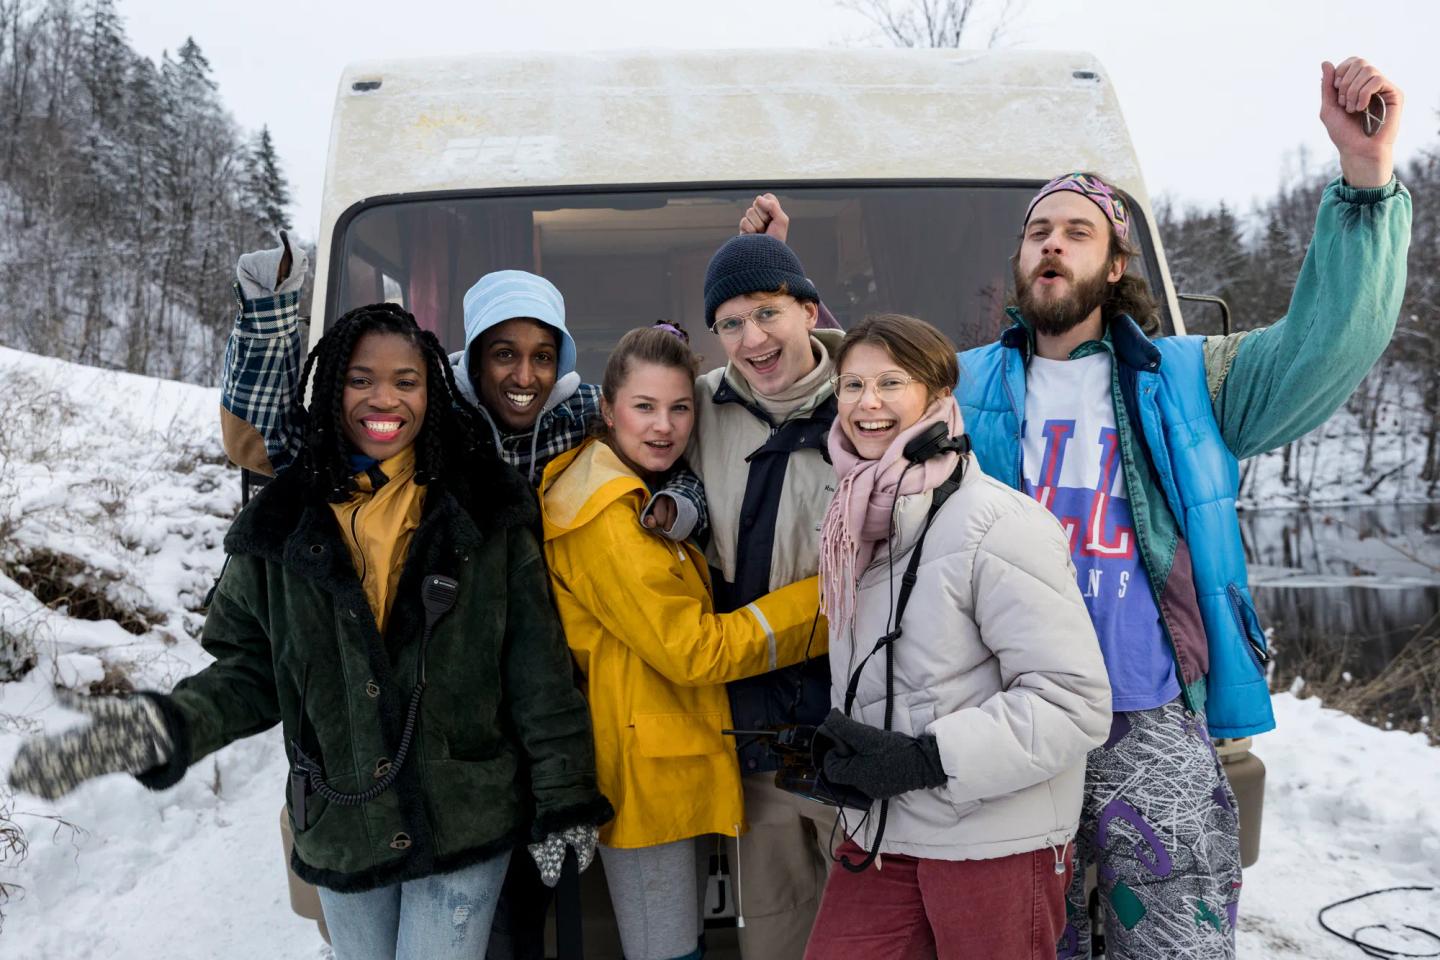 a group of people posing for a photo in front of a snow covered bus